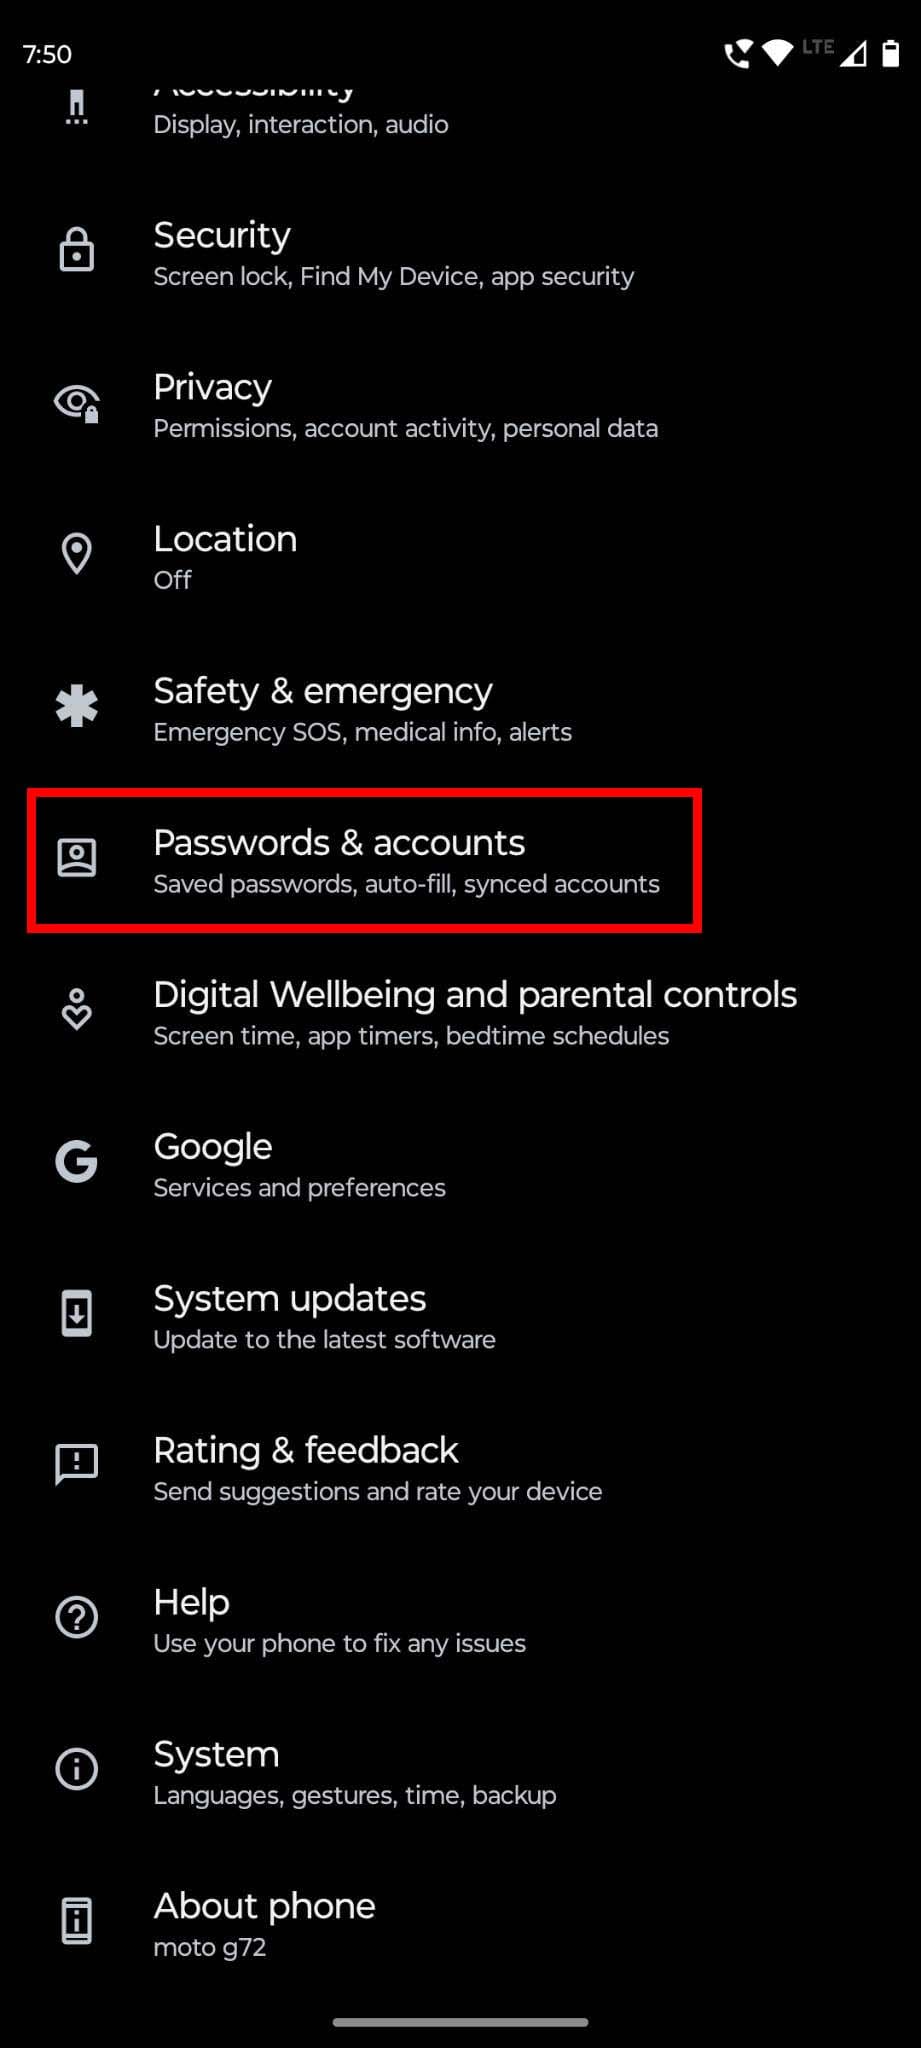 Screenshot of Passwords and accounts option on Settings